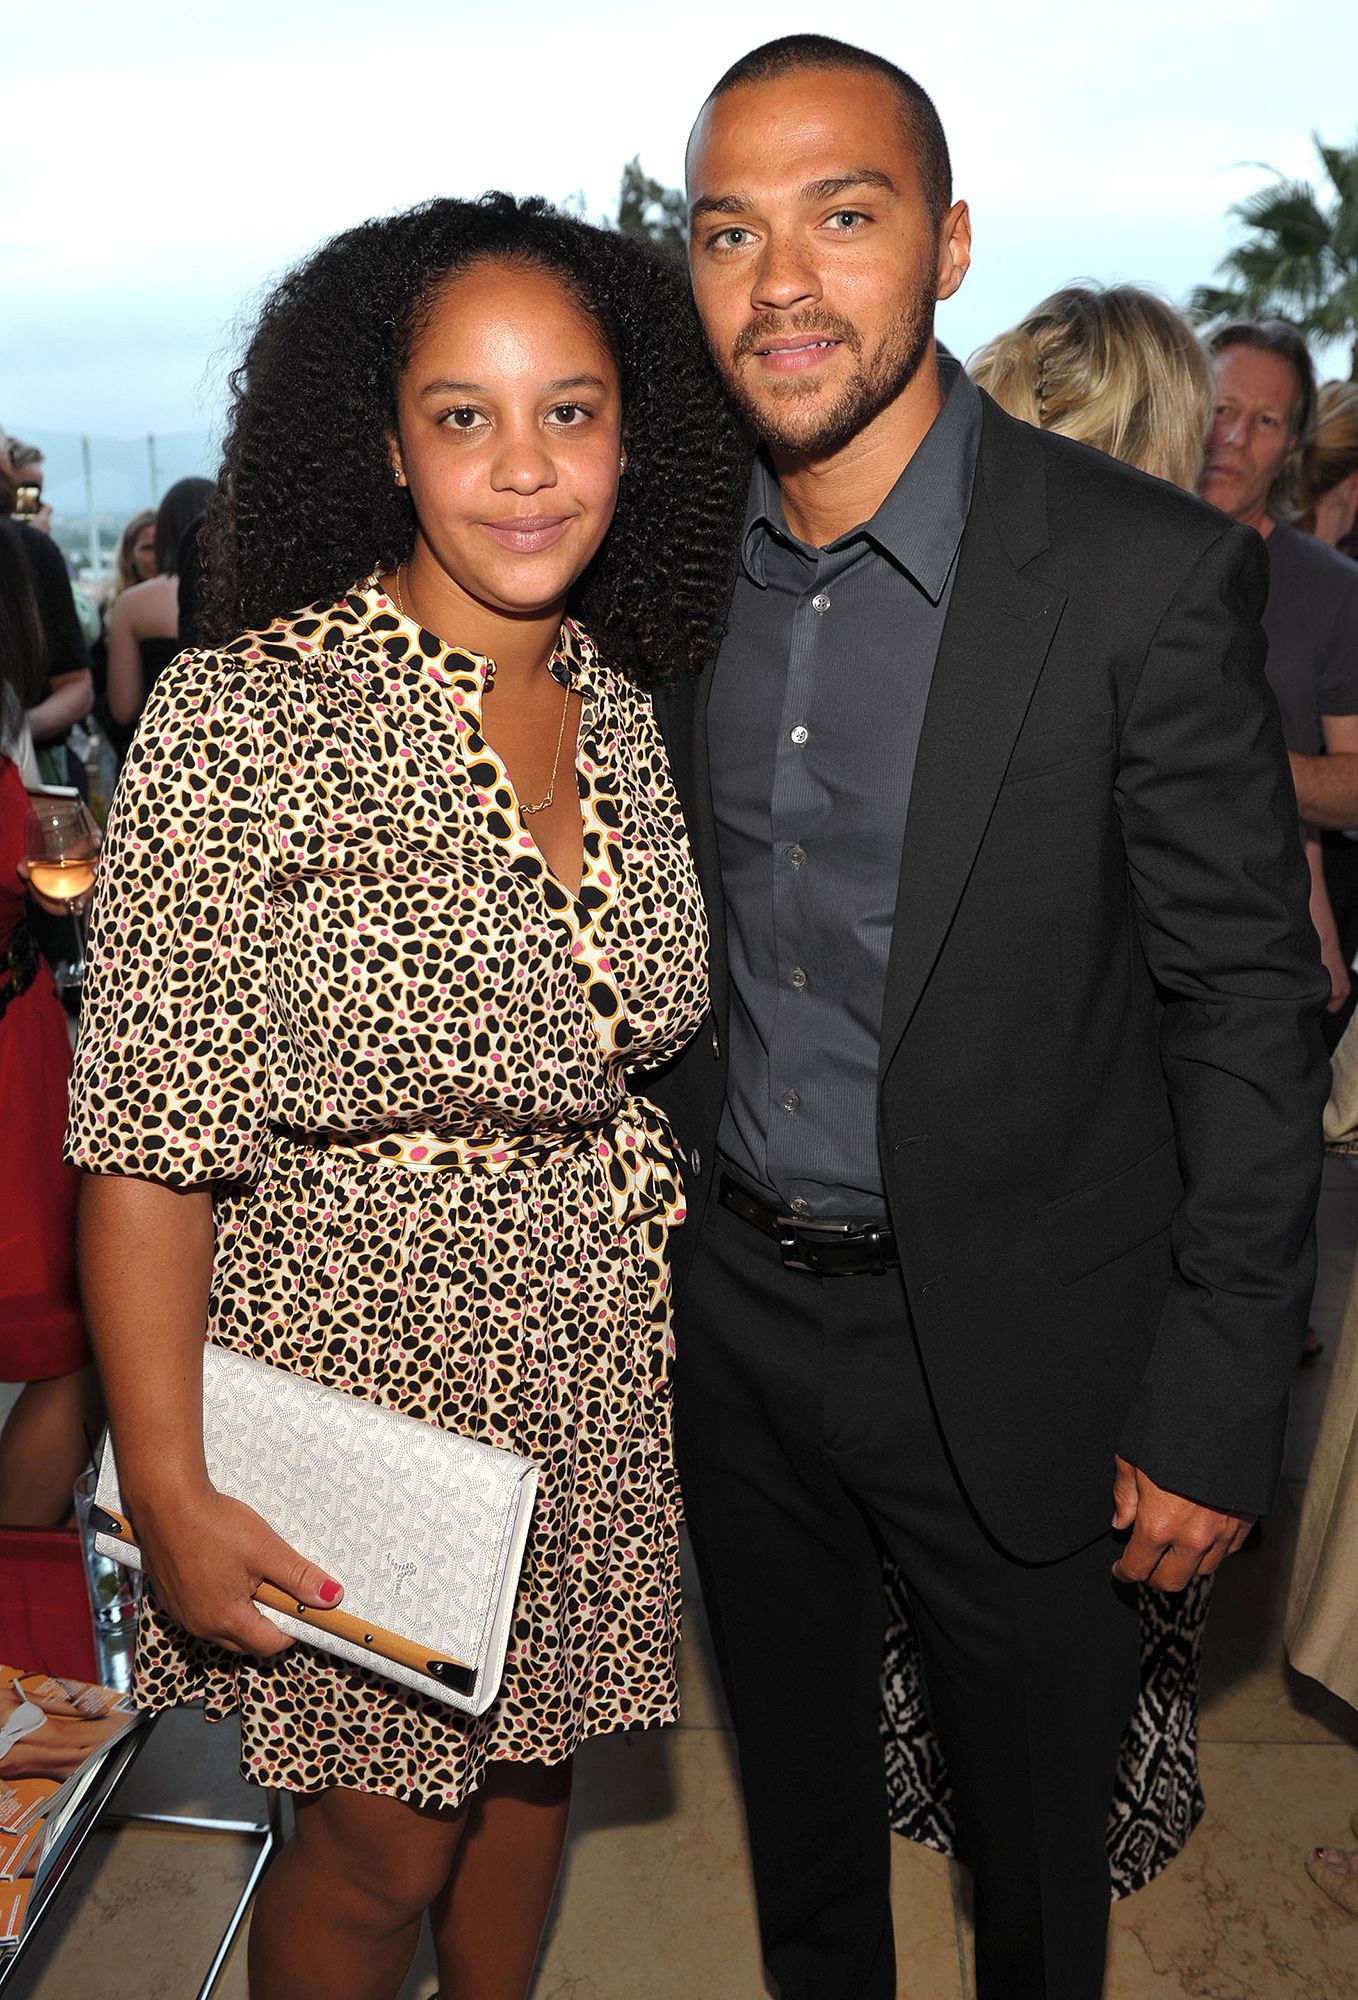 Jesse Williams Given Visitation in Custody Filing, He and Ex-Wife Ordered to Co-Parenting Sessions